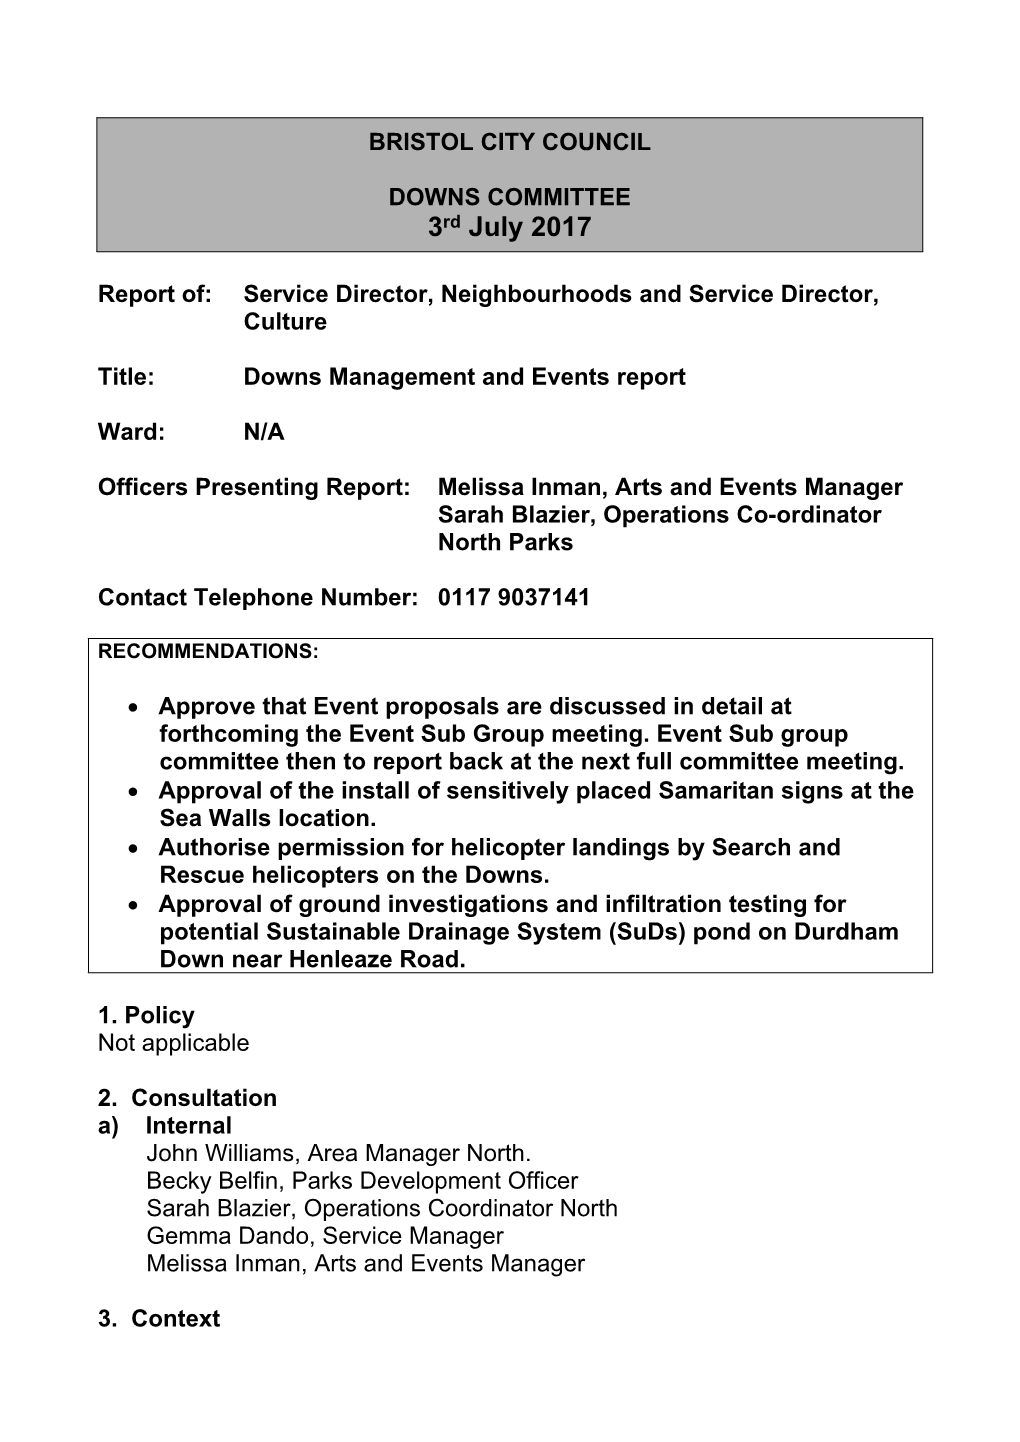 Downs Management and Events Report PDF